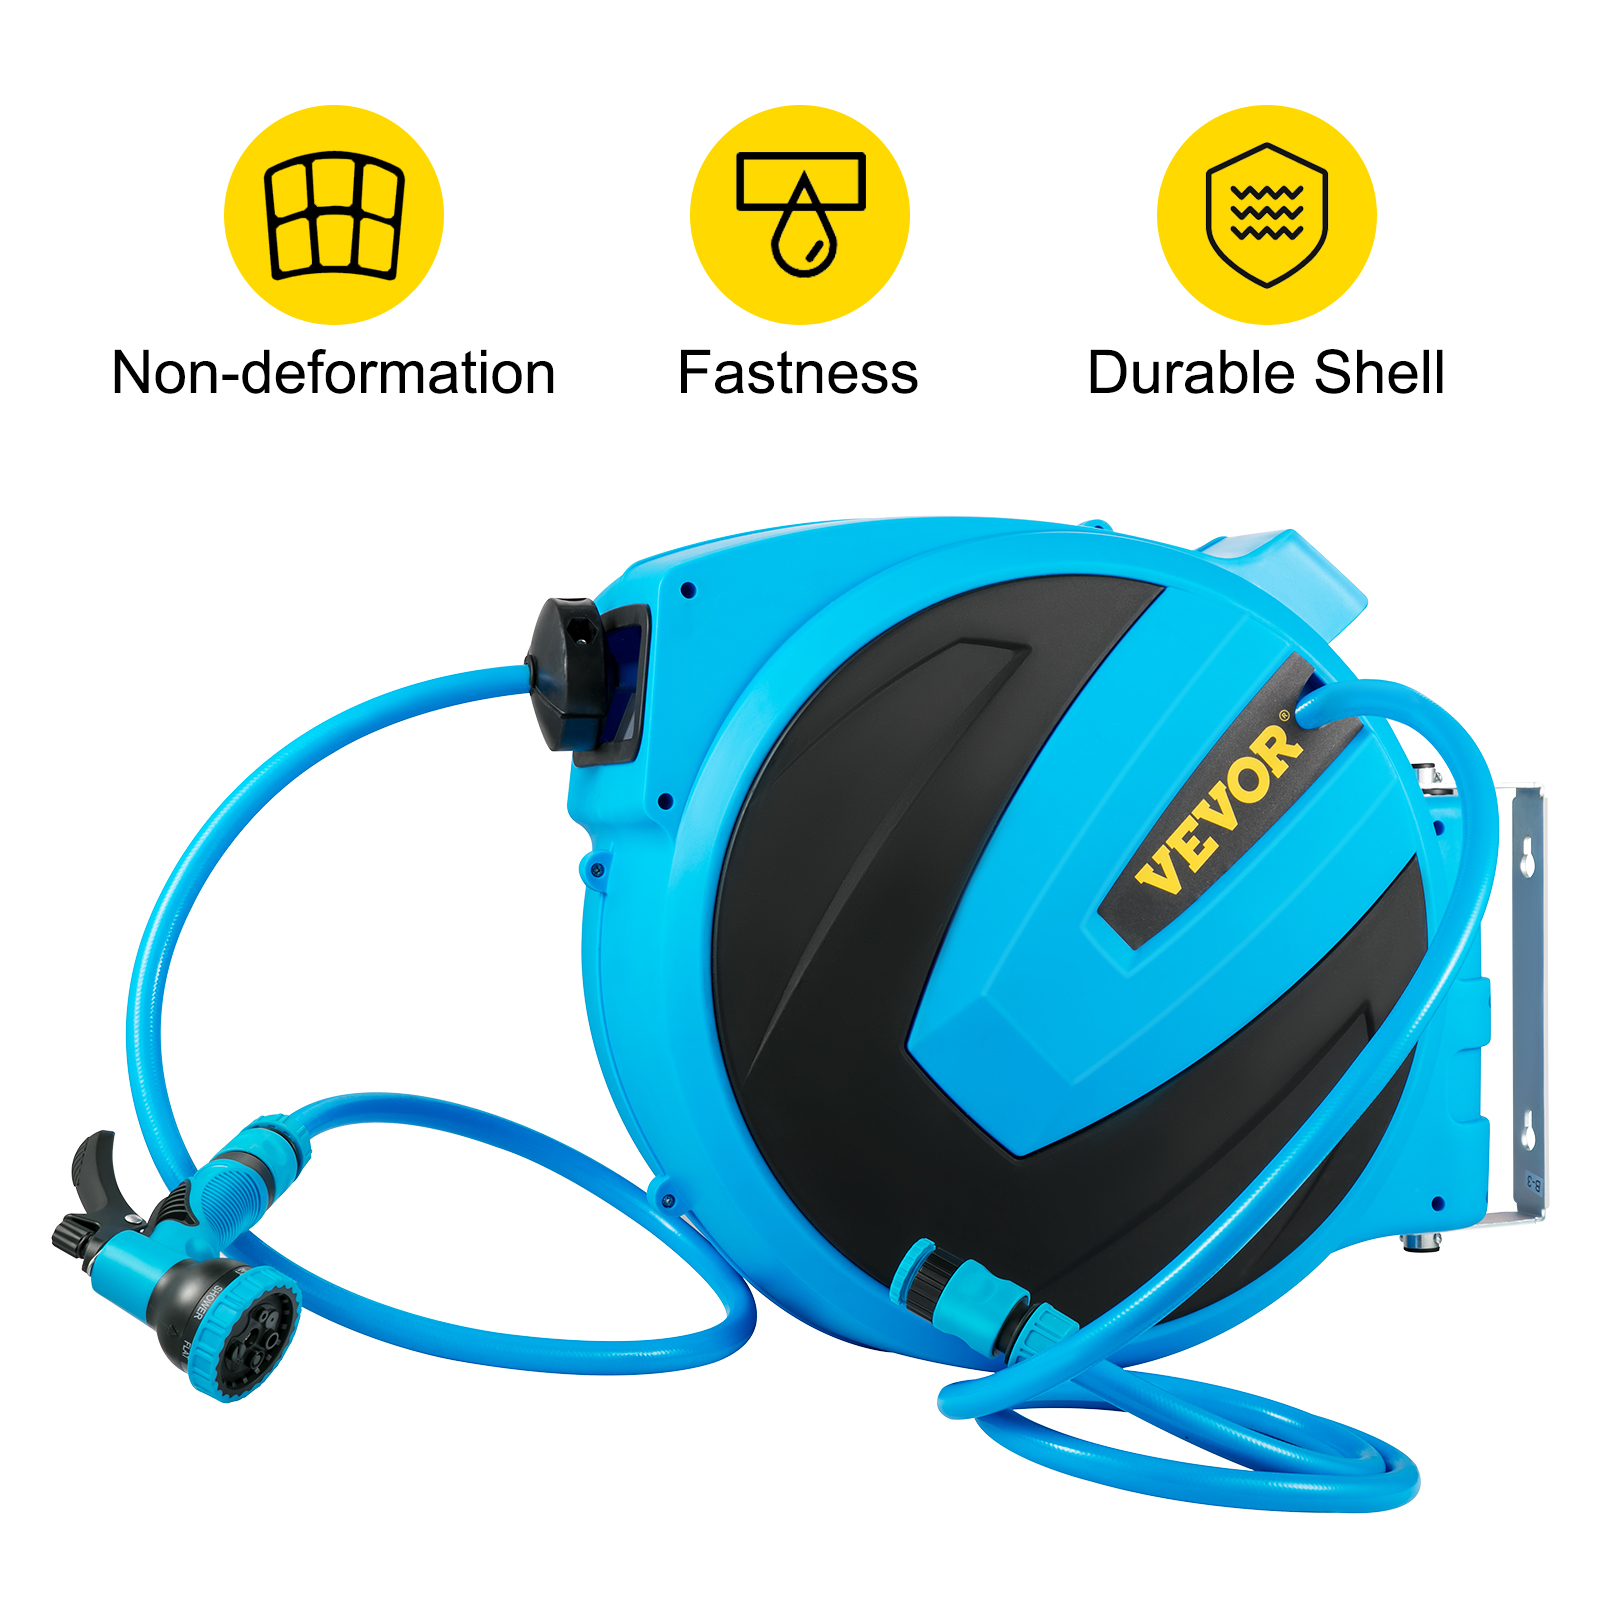 https://d2qc09rl1gfuof.cloudfront.net/product/SSS90FT58INCHXW0A/retractable-hose-reel-m100-3.jpg